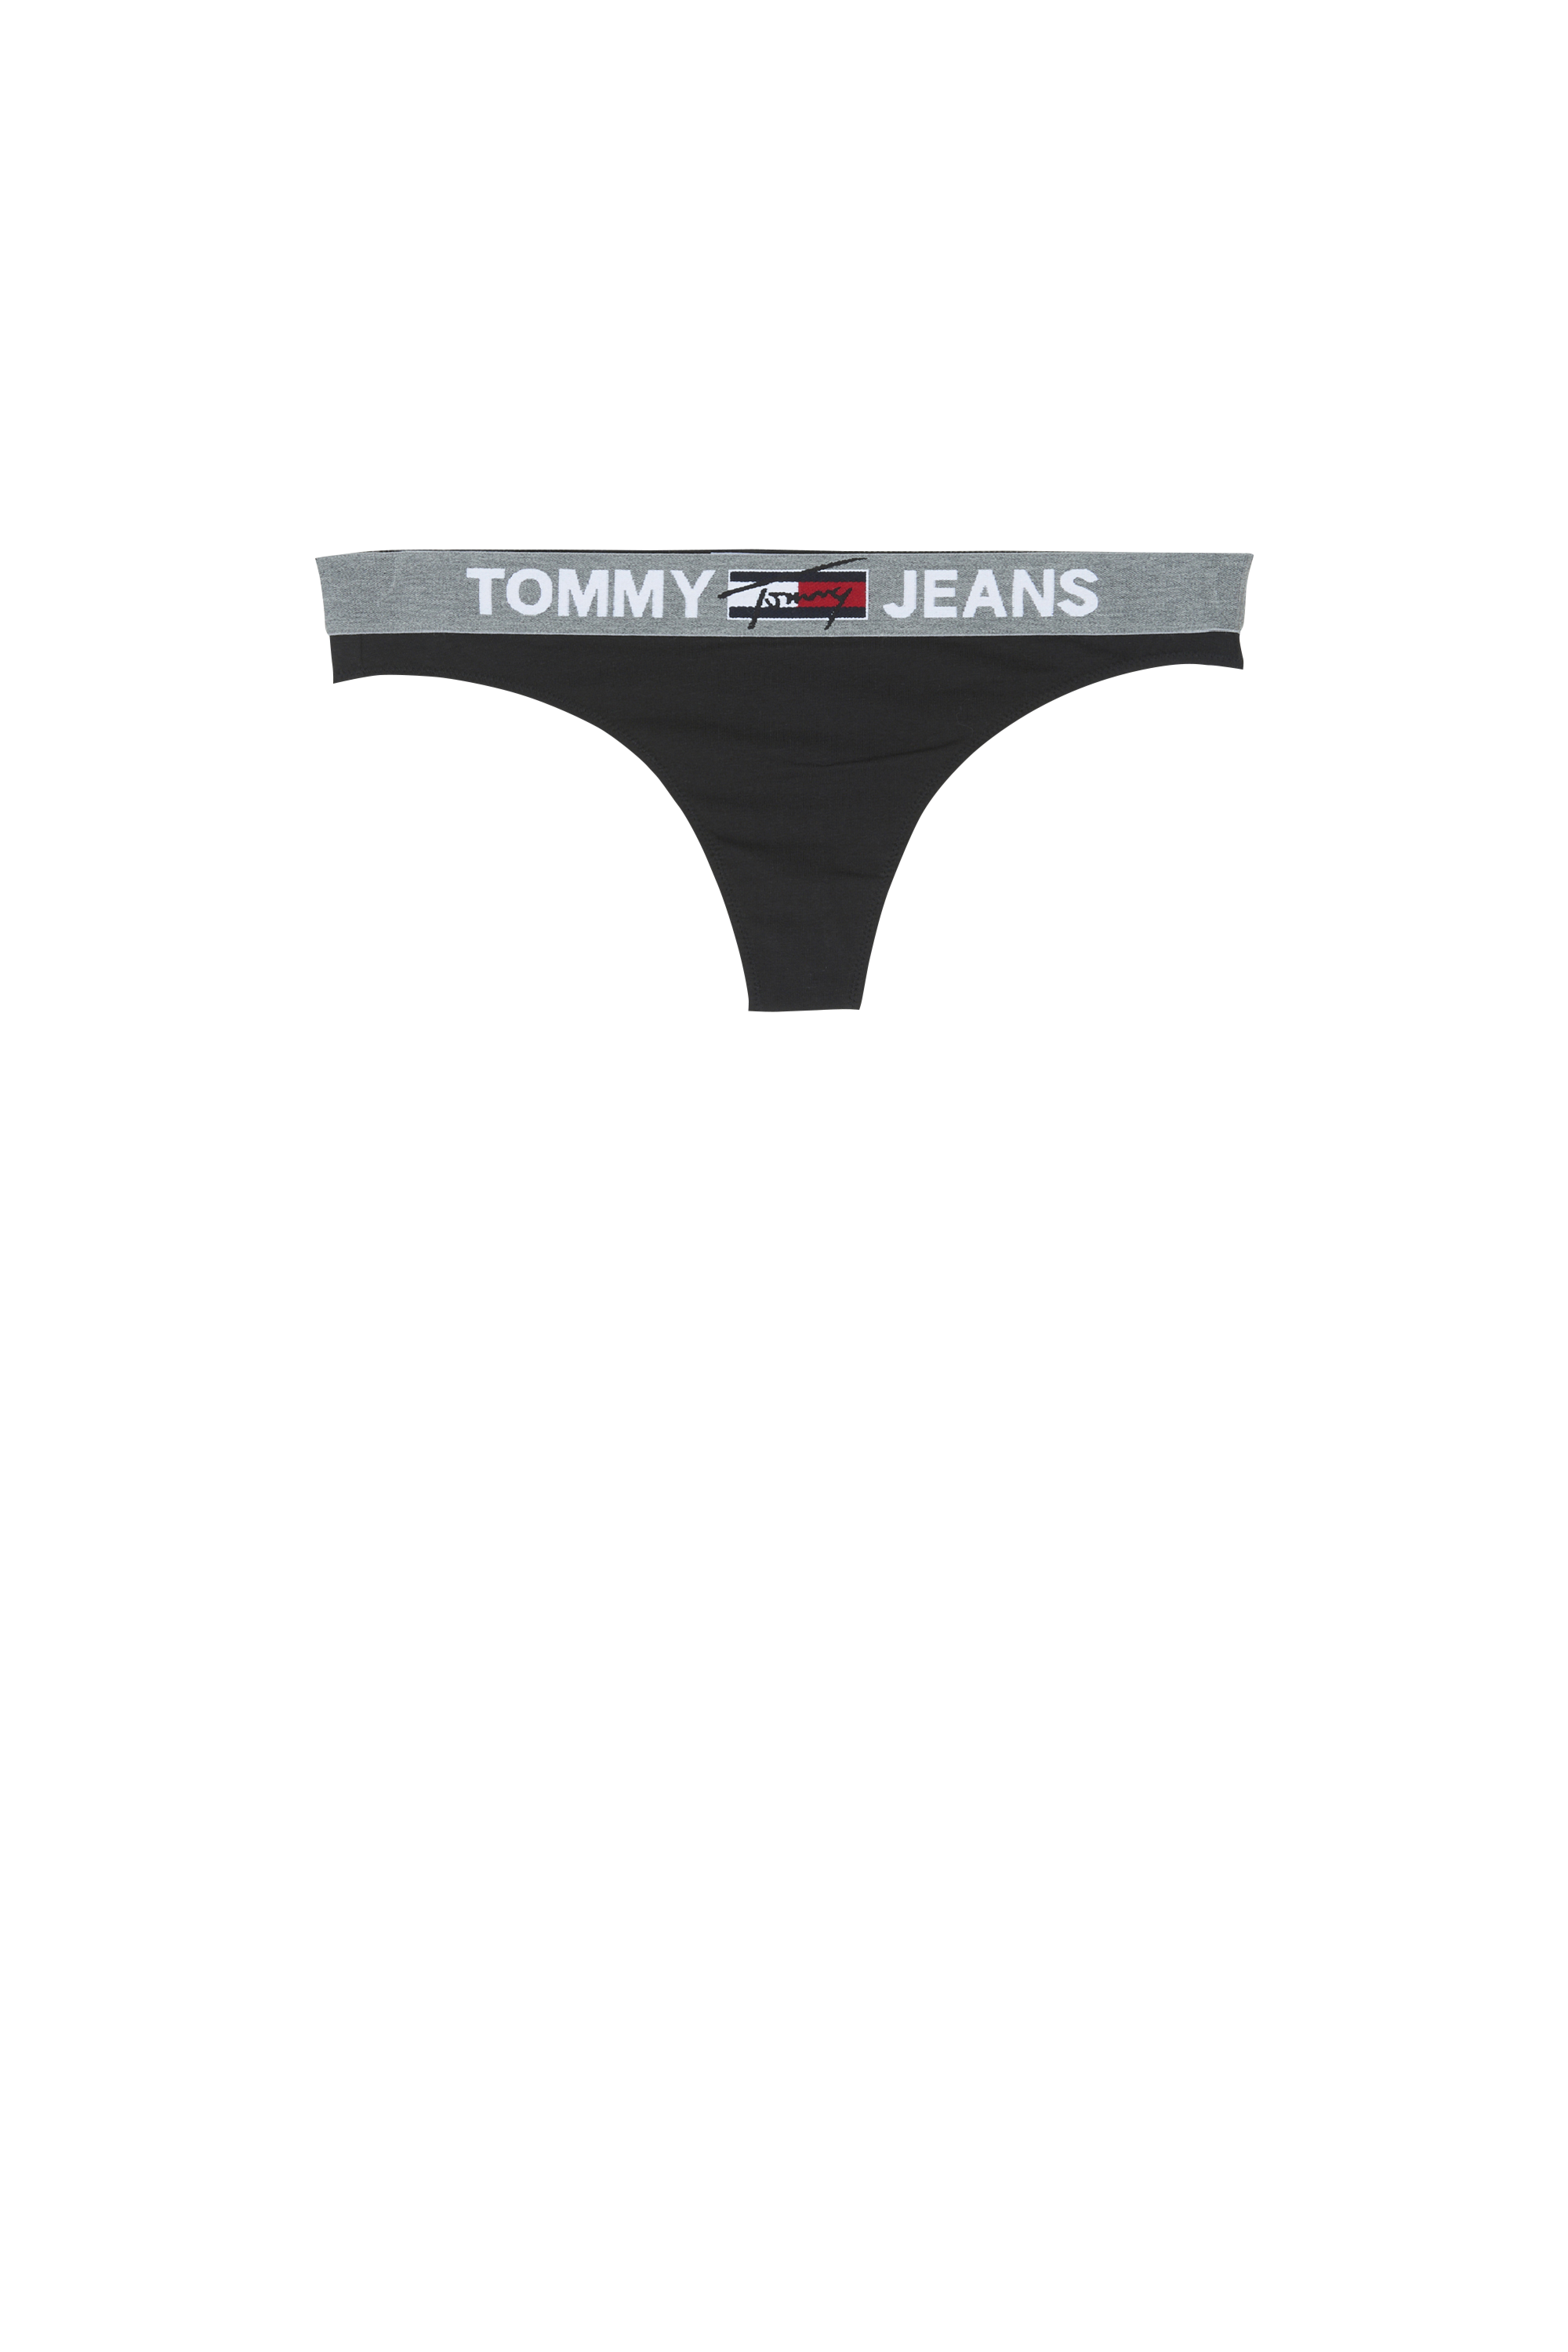 Tommy Hilfiger - String - Taille M